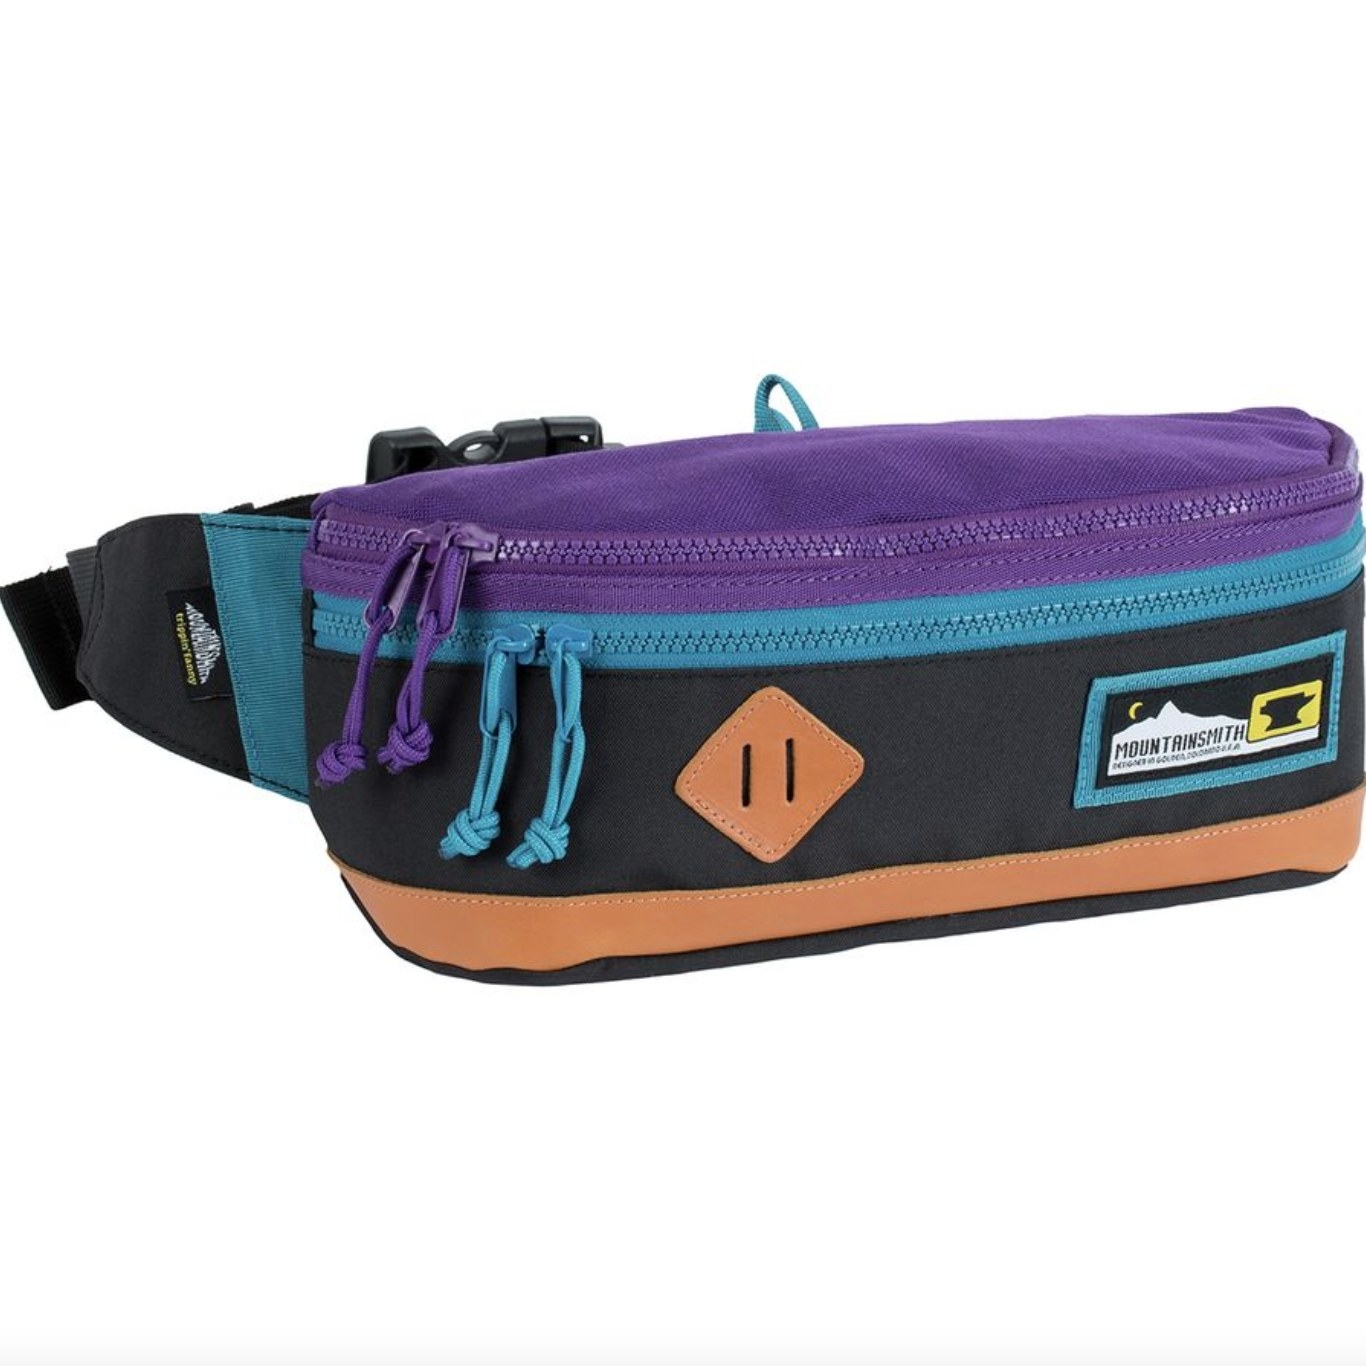 The Mountainsmith trippin fanny pack in purple reign